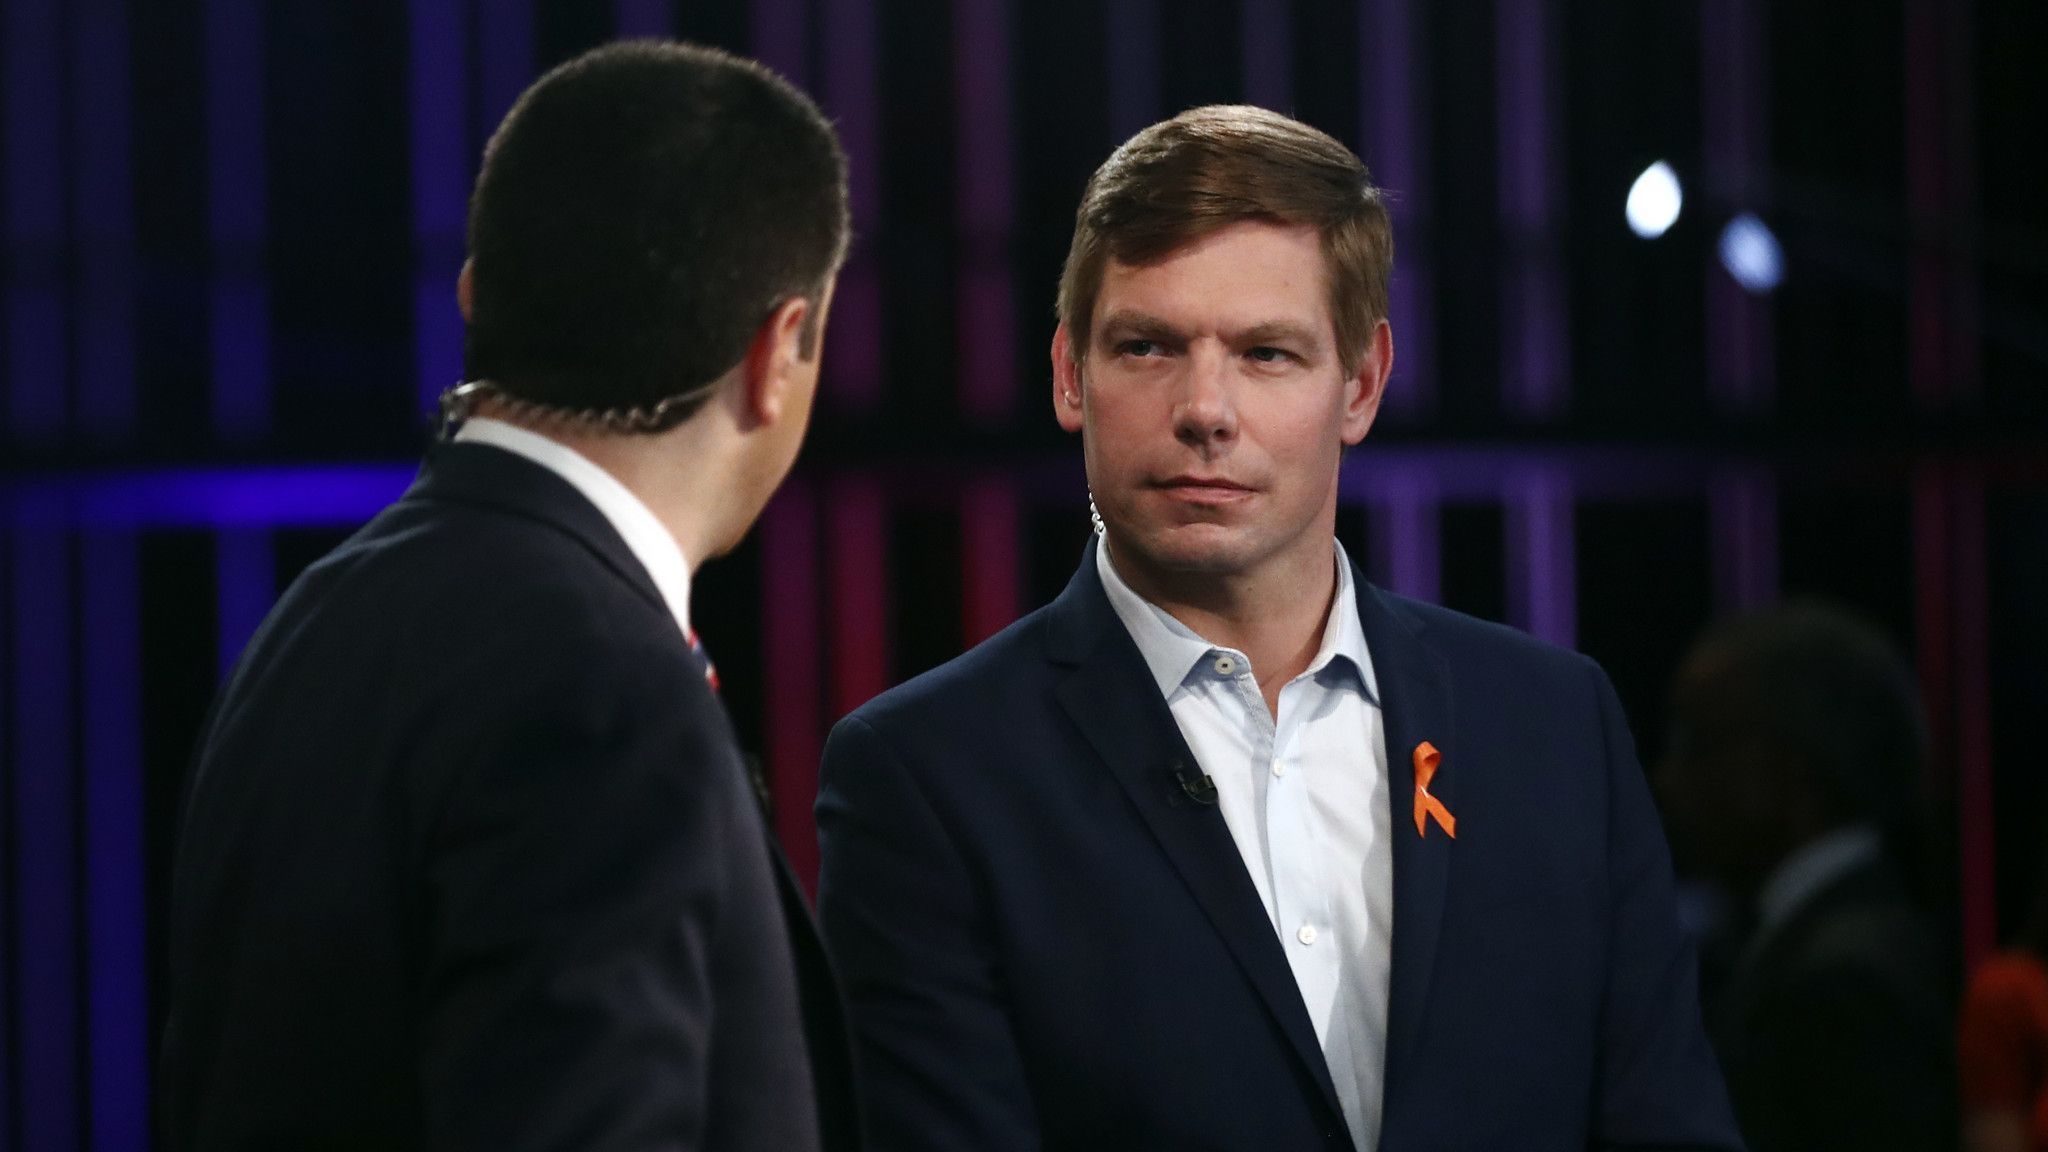 Eric Swalwell quits presidential race; Tom Steyer set to enter